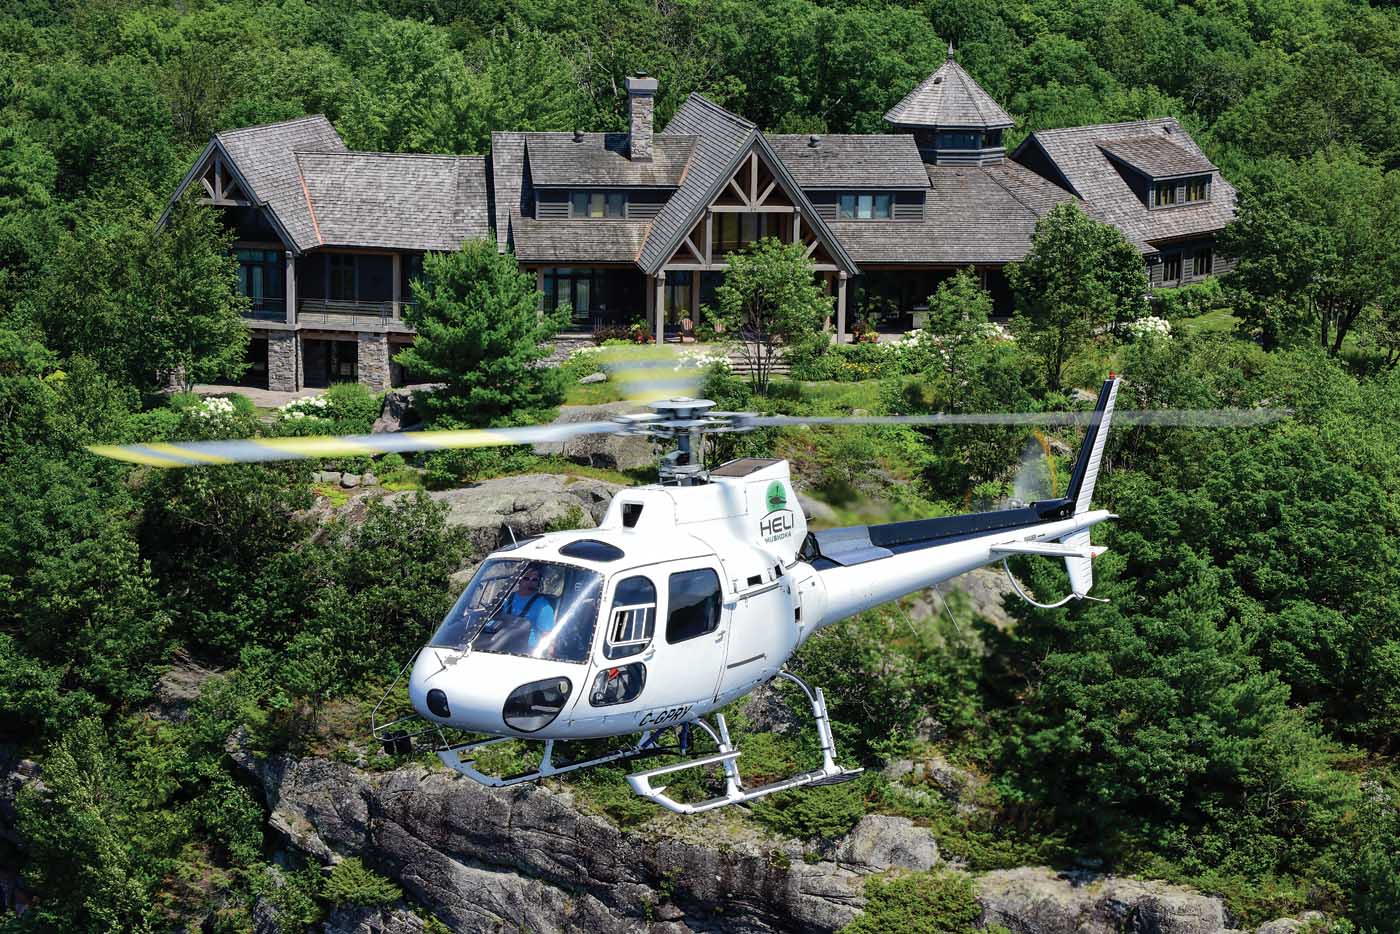 Heli Muskoka is based in the region of Muskoka, about two hours’ drive north of Toronto, Ontario. Dotting the shorelines of its many lakes are some truly spectacular country retreats.